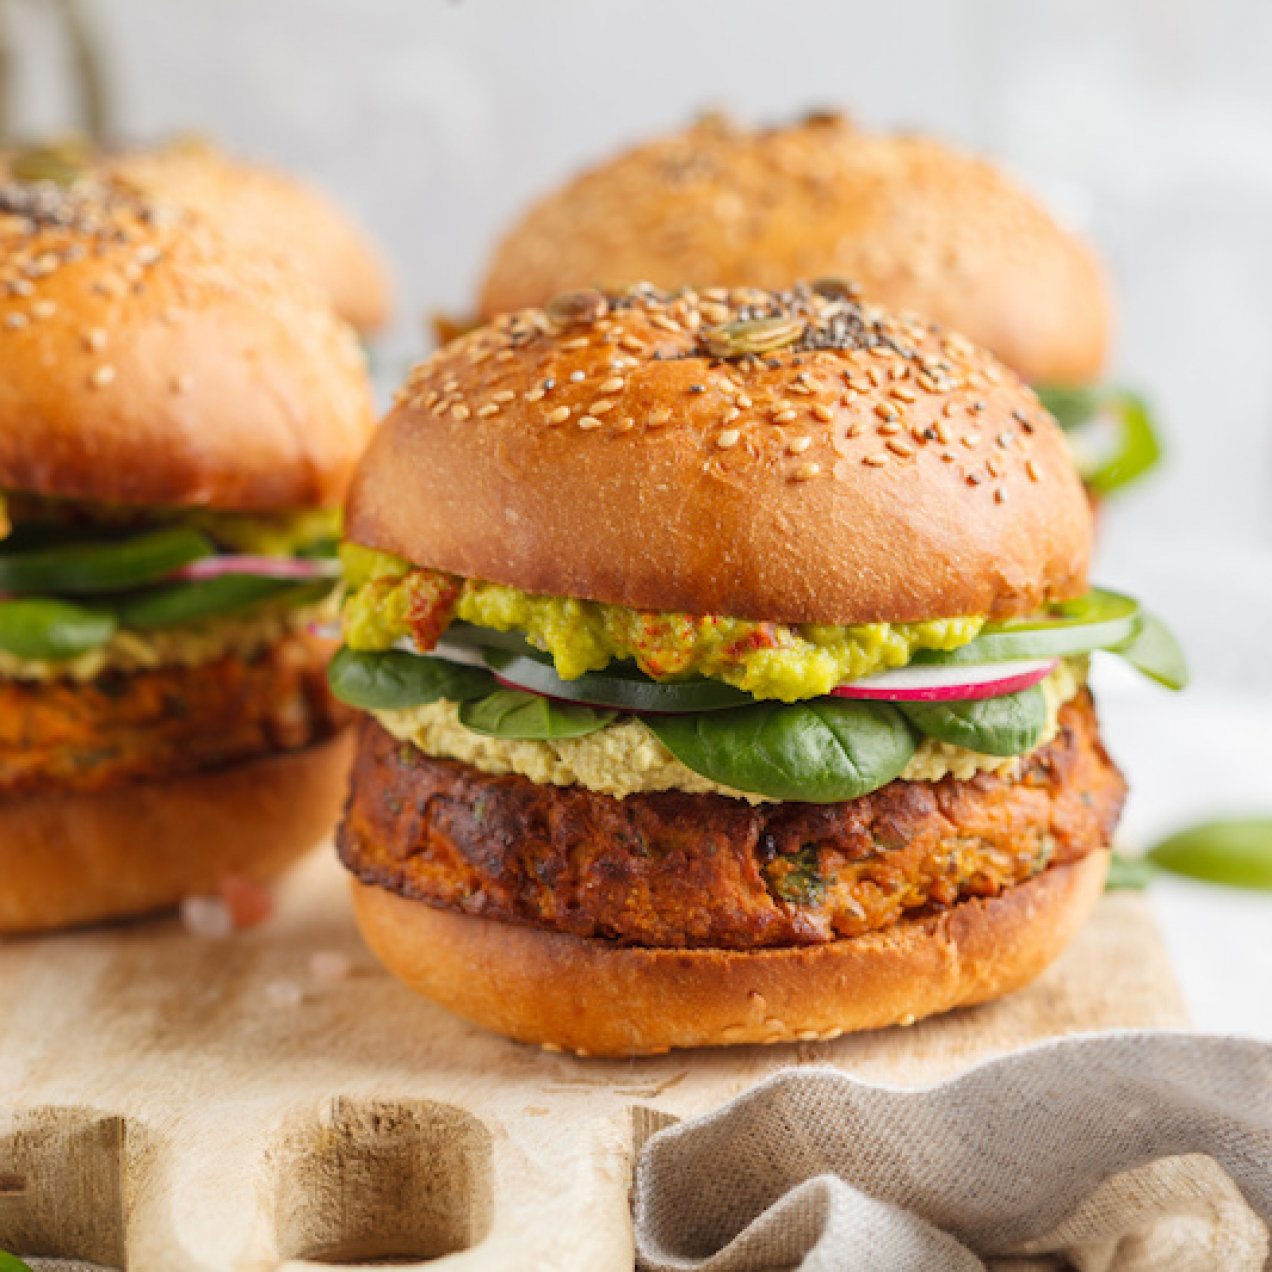 Vegan Burger Buns – The Right Ingredients Make The Difference